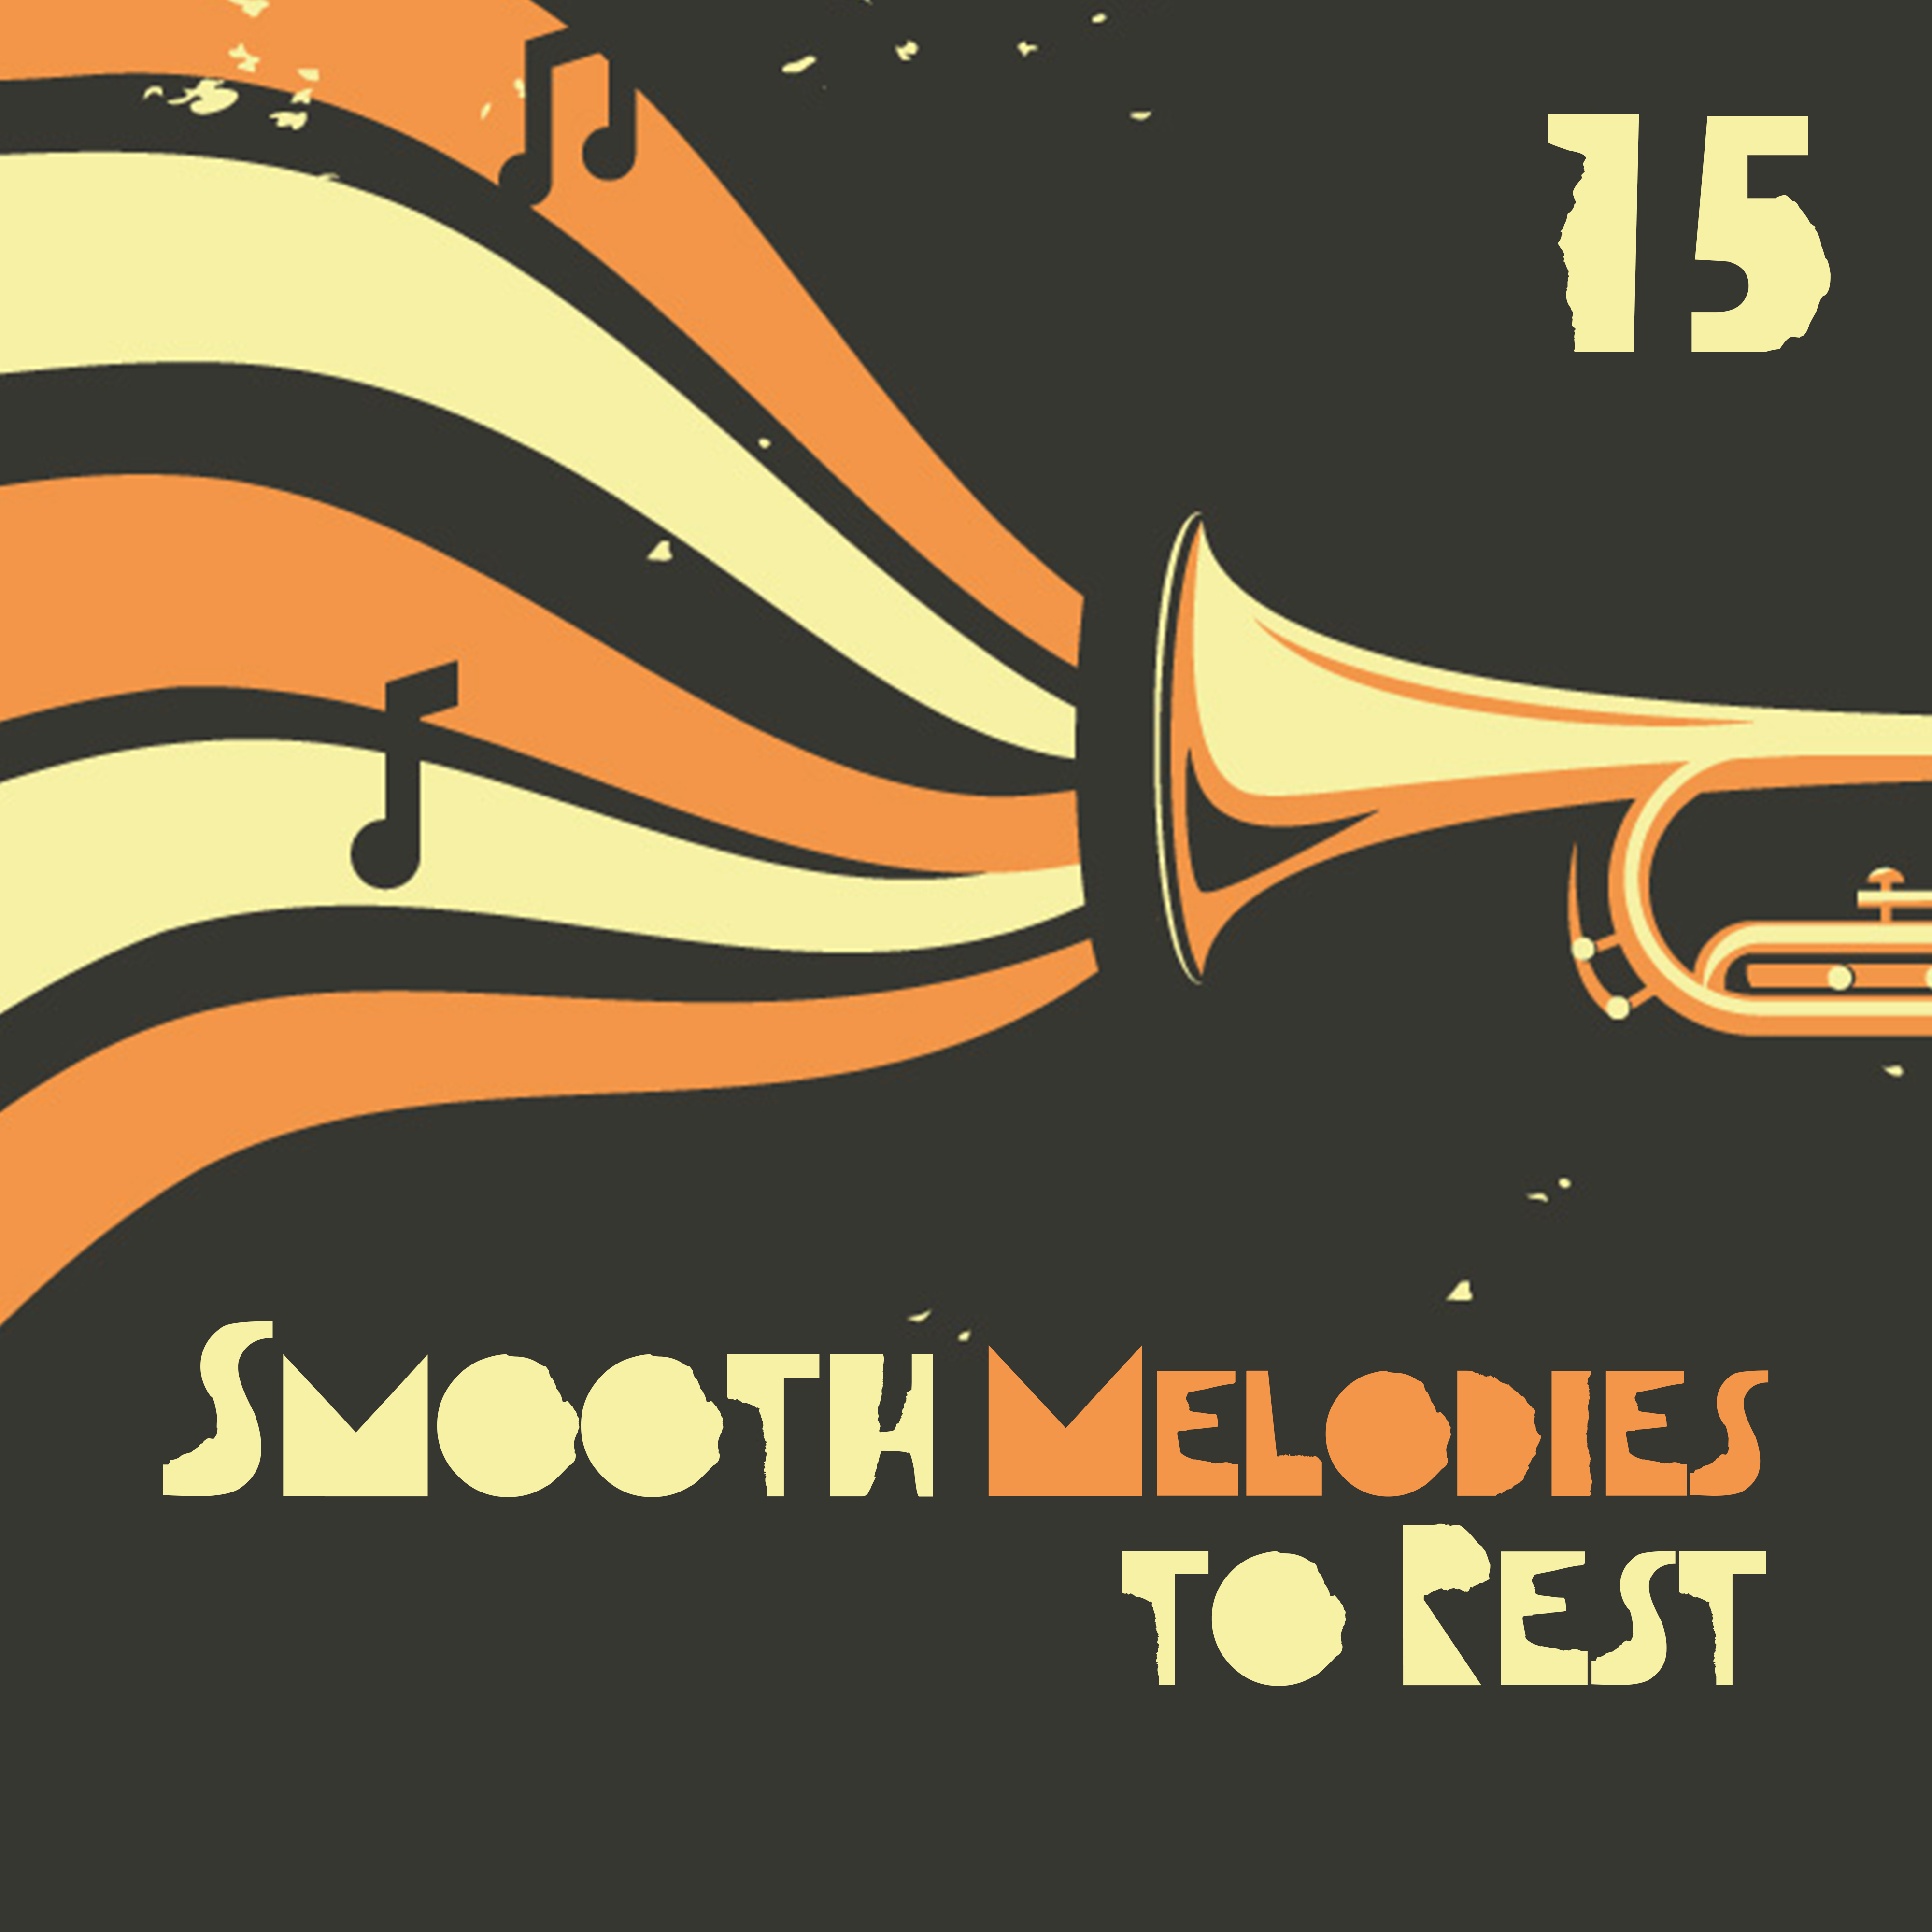 15 Smooth Melodies to Rest